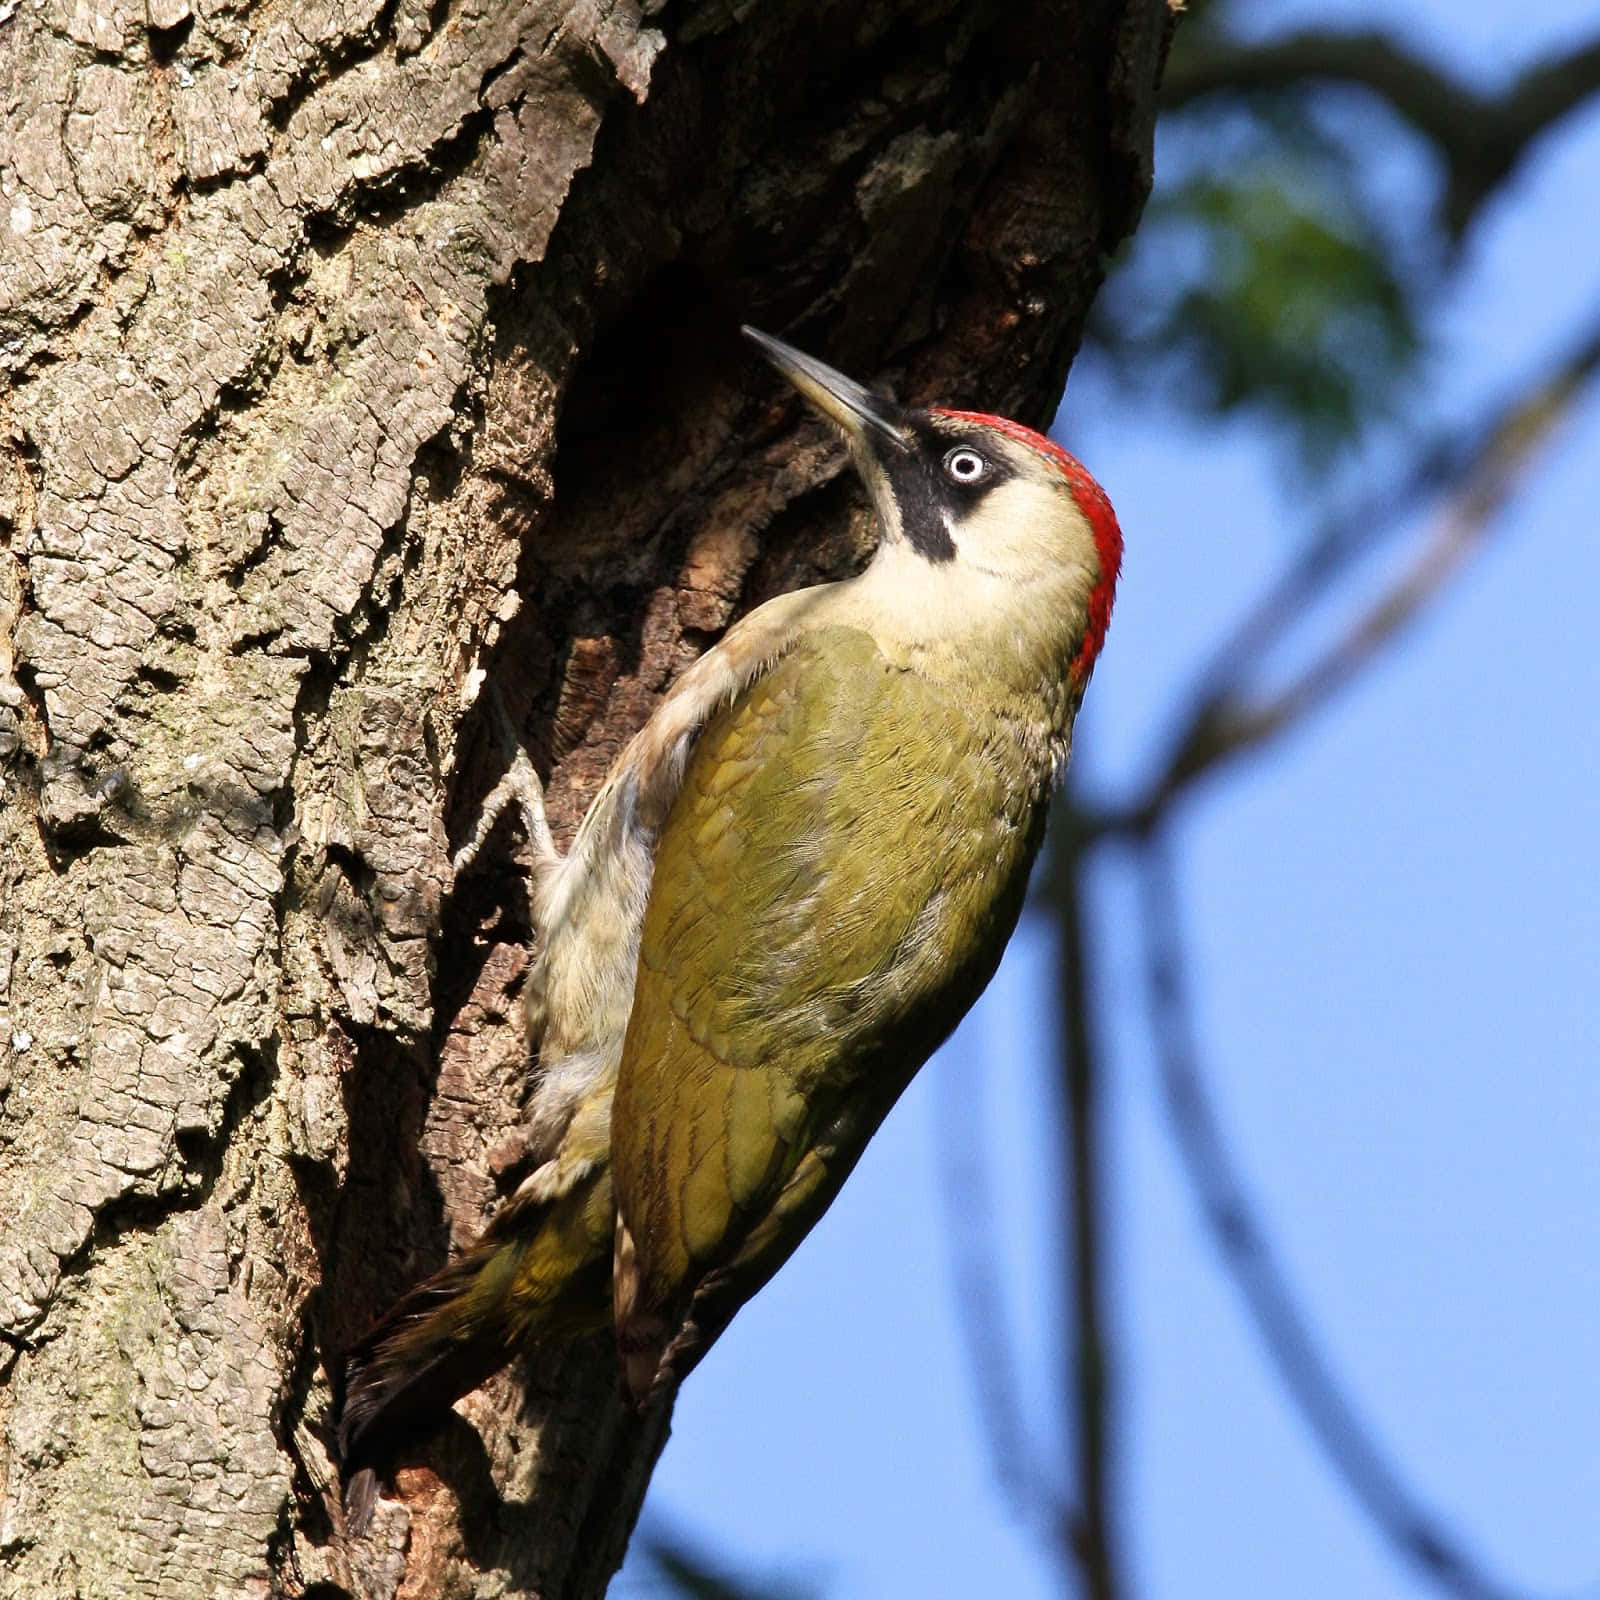 A multi-coloured woodpecker pecking at a tree trunk